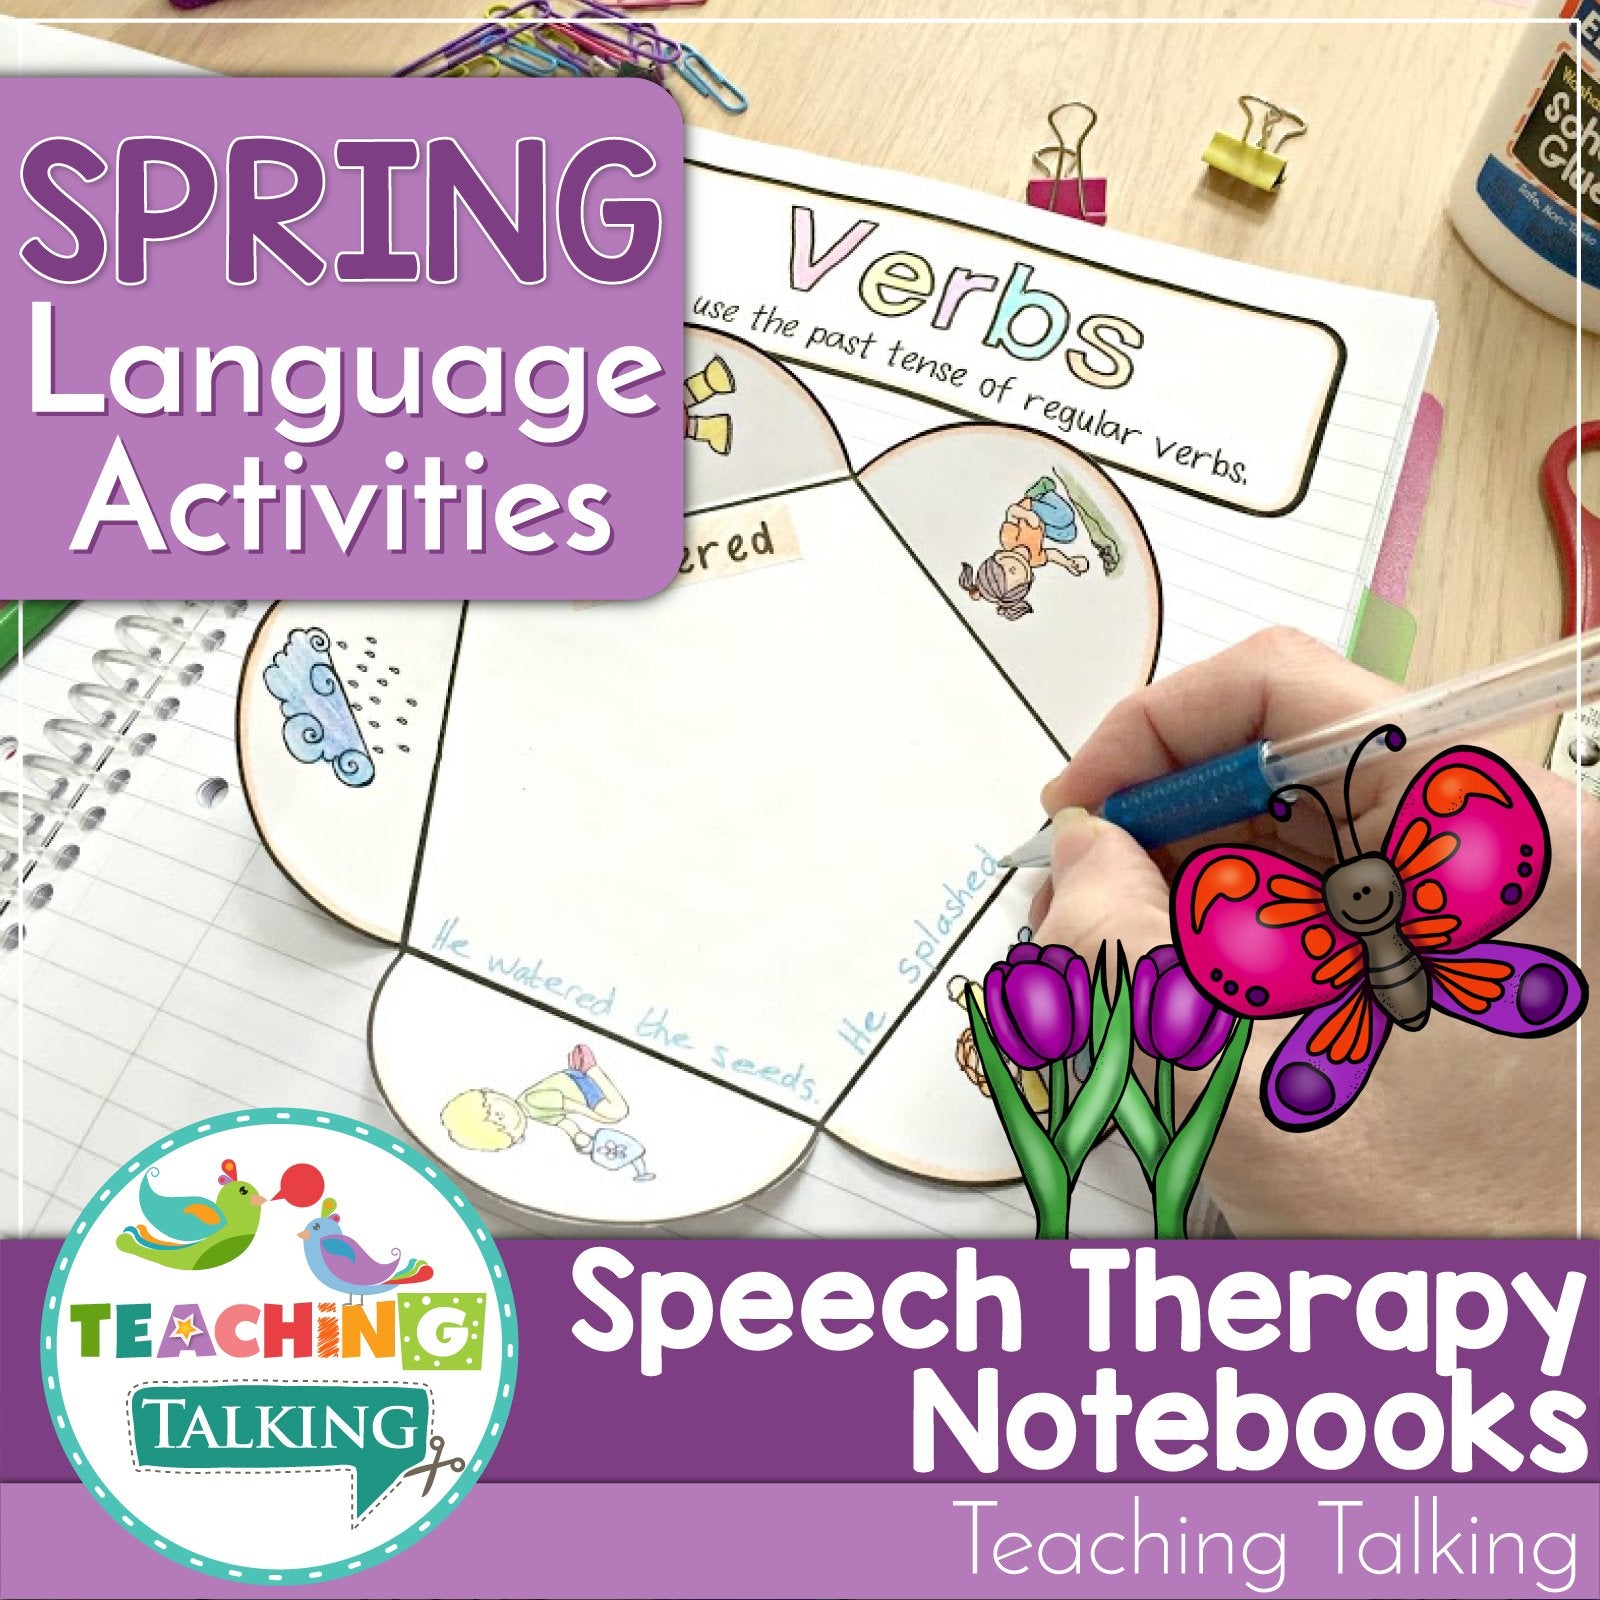 Teaching Talking Printable Speech Therapy Language Notebooks for Spring